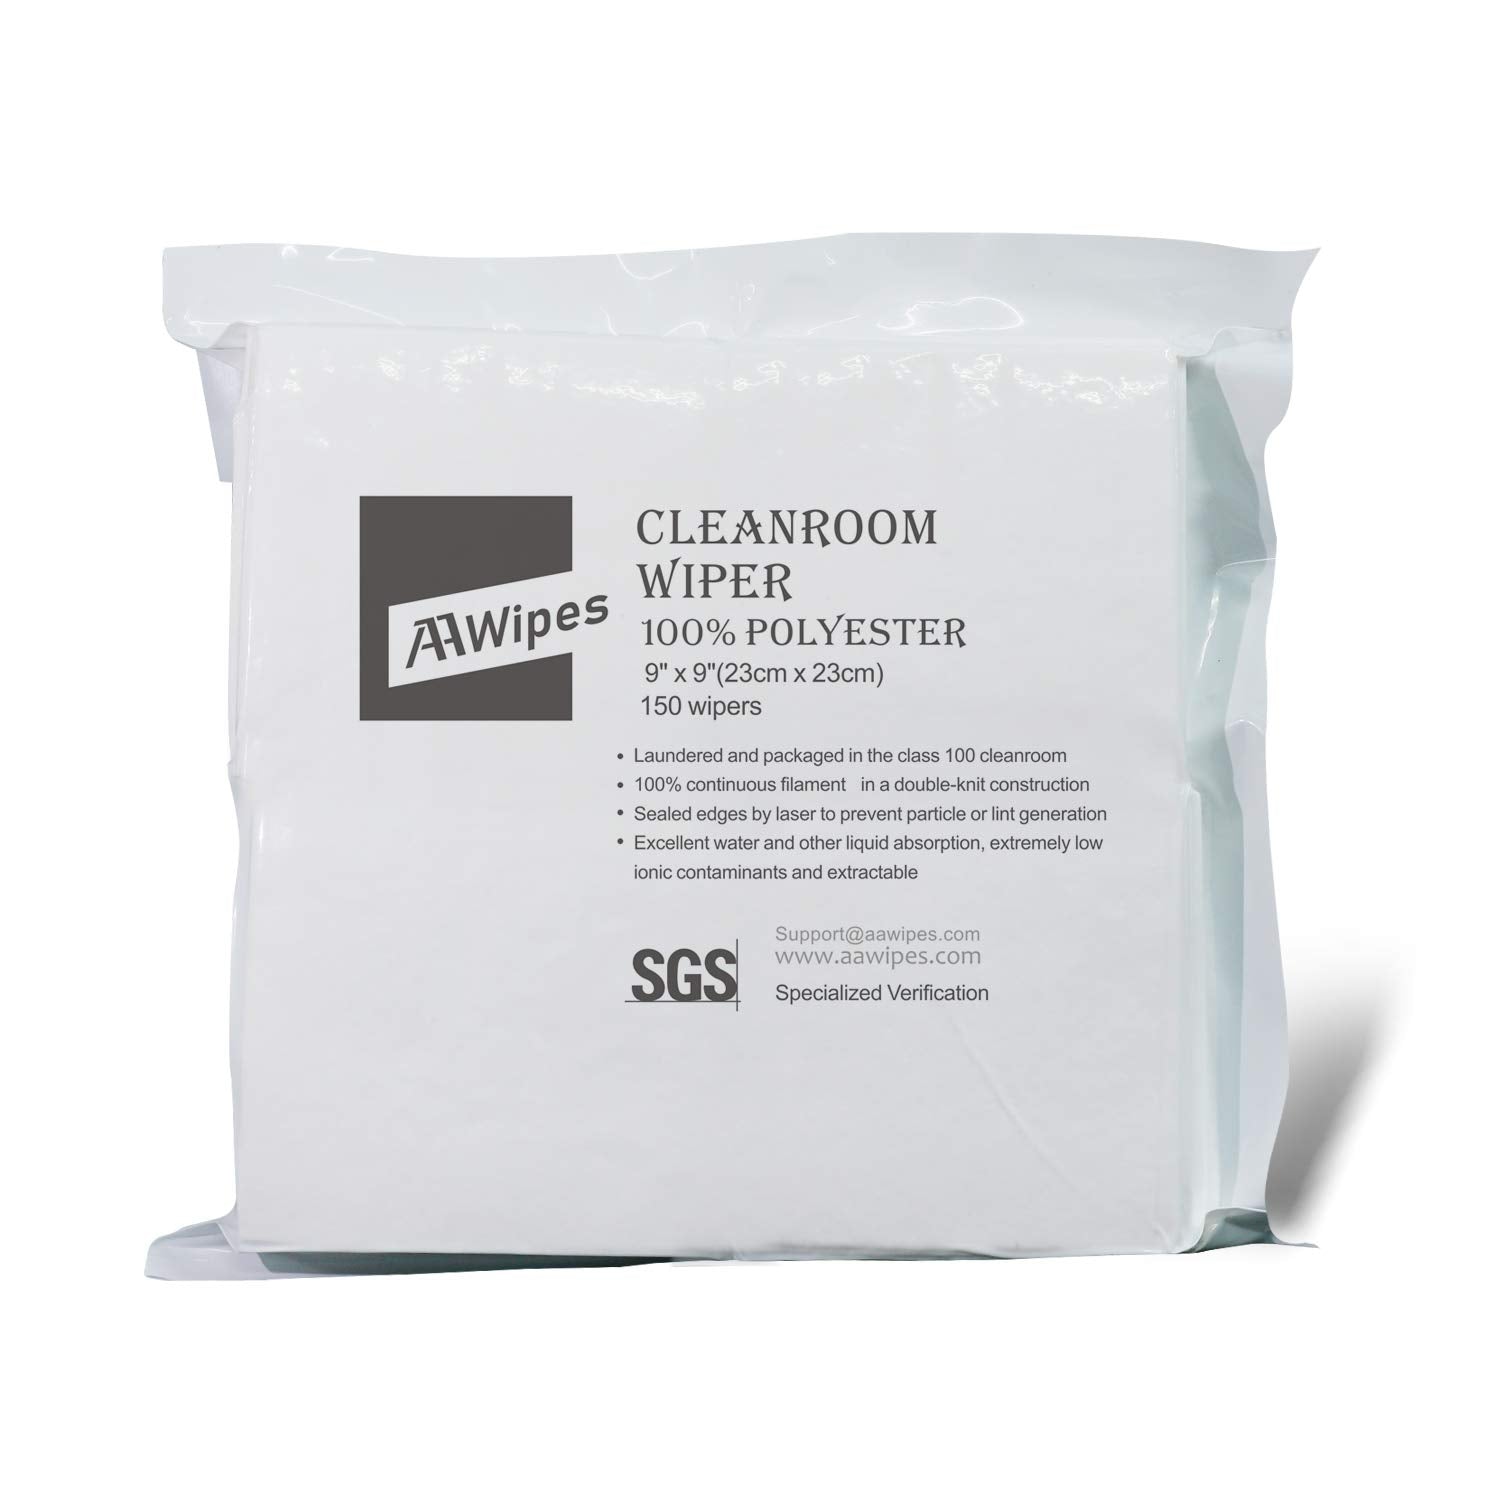 Lint-free Cleanroom Wipers Polyester Wipes 9"x9" (No. CP14009-140 Bags/10 Boxes for Mac)